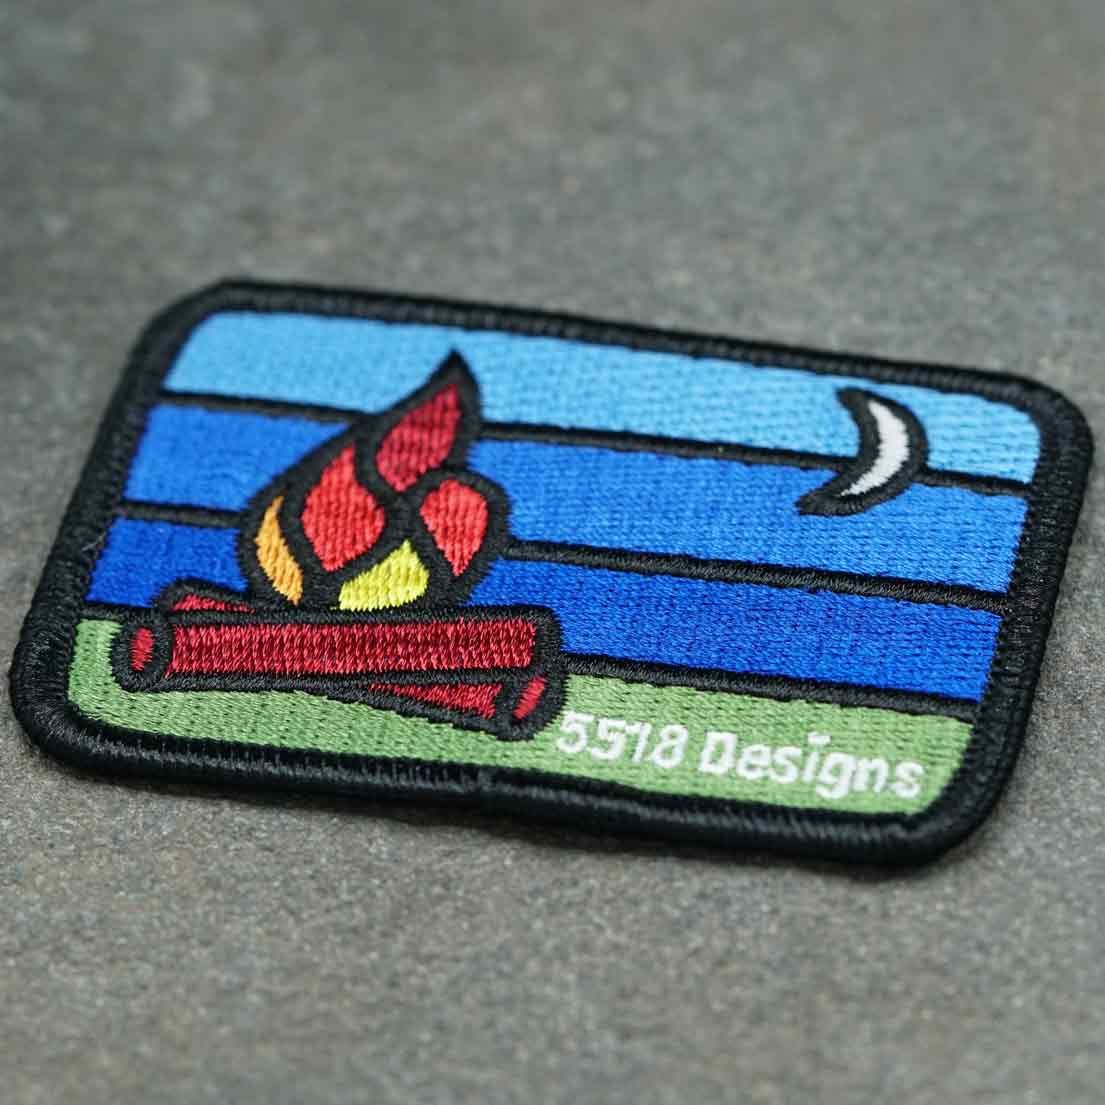 Designer patch Embroidered patches Iron on patch Round patches